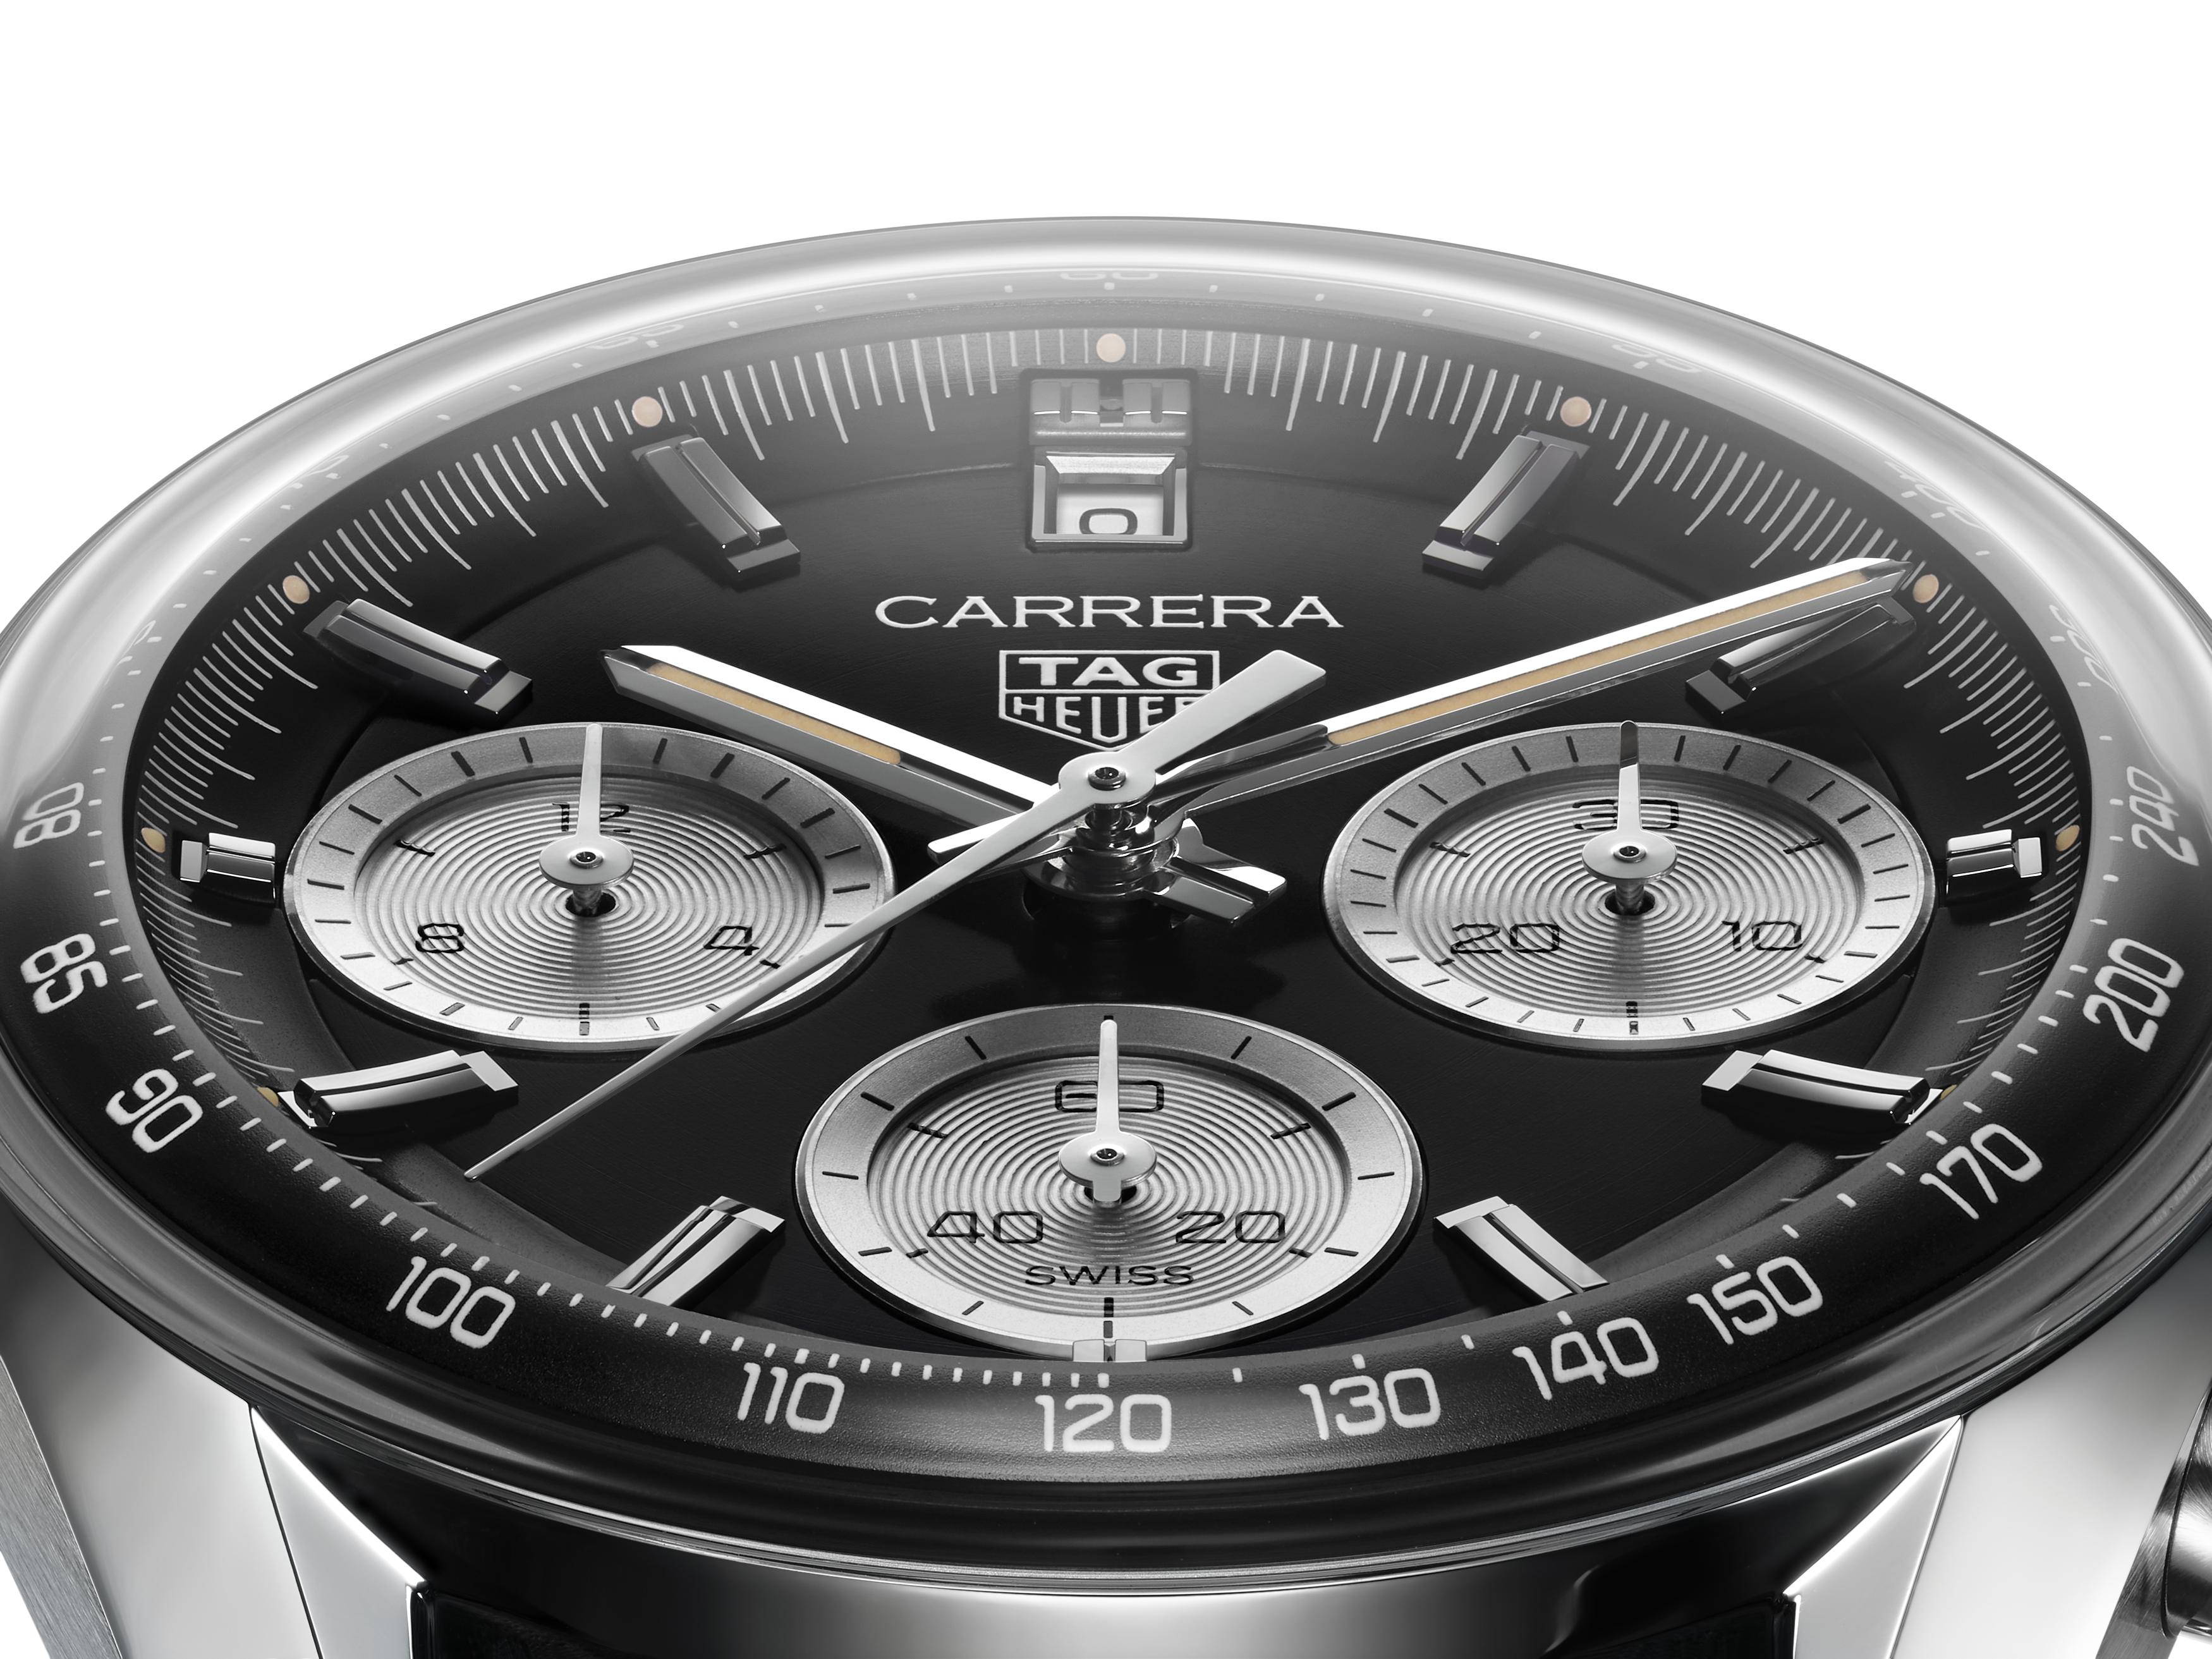 LVMH Brand TAG Heuer to launch Smartwatch in 2015